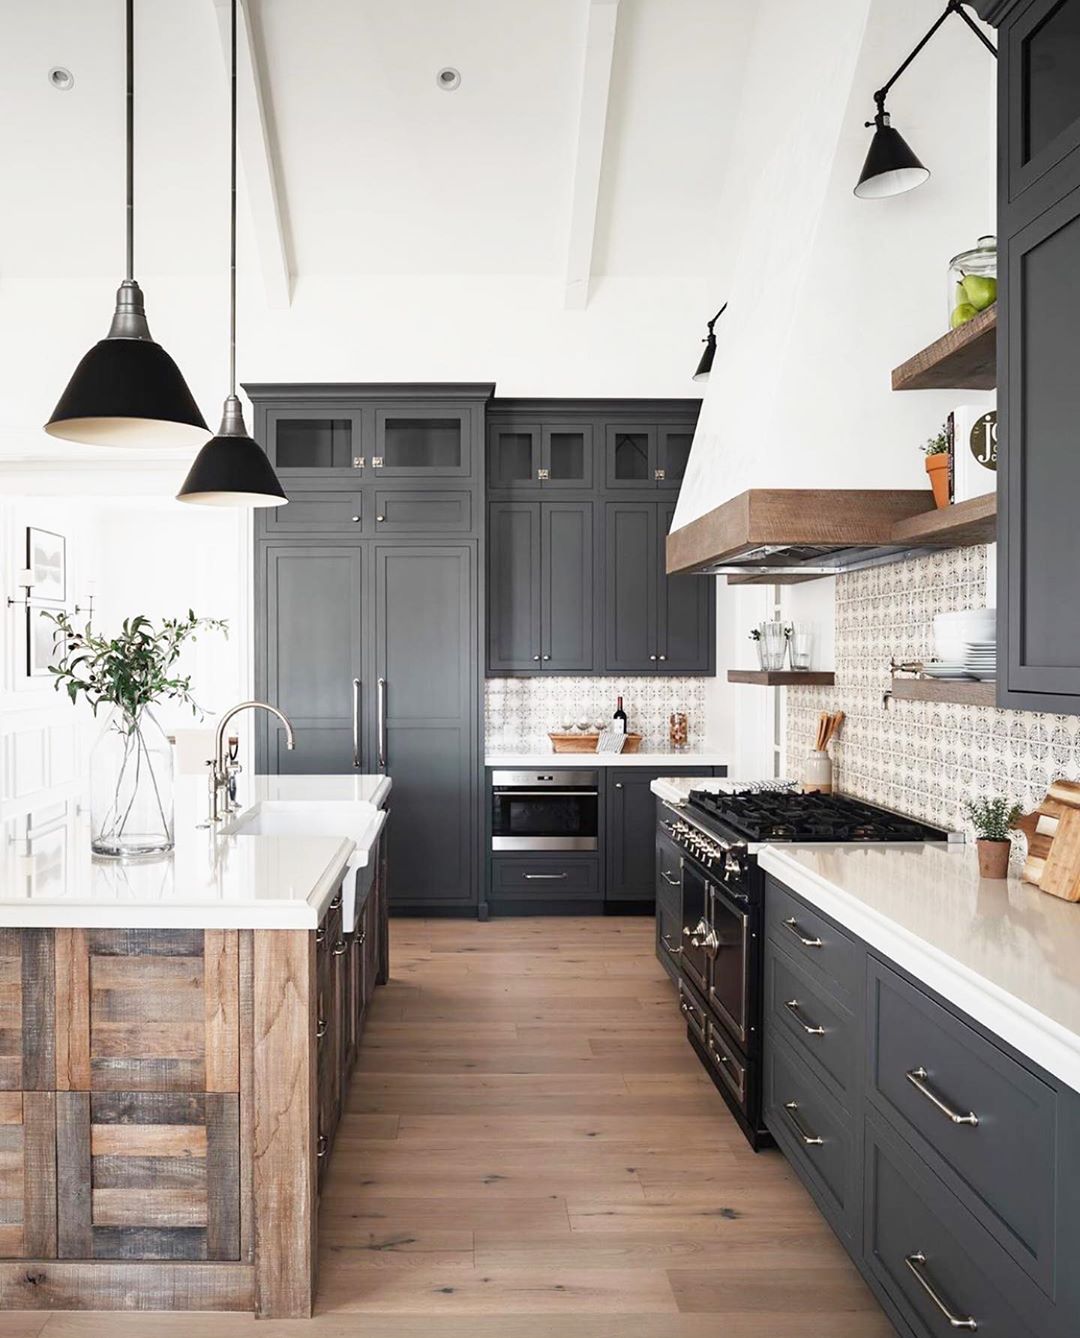 40 VERY BEAUTIFUL KITCHEN IDEAS FOR YOU! - Page 12 of 40 - My Blog